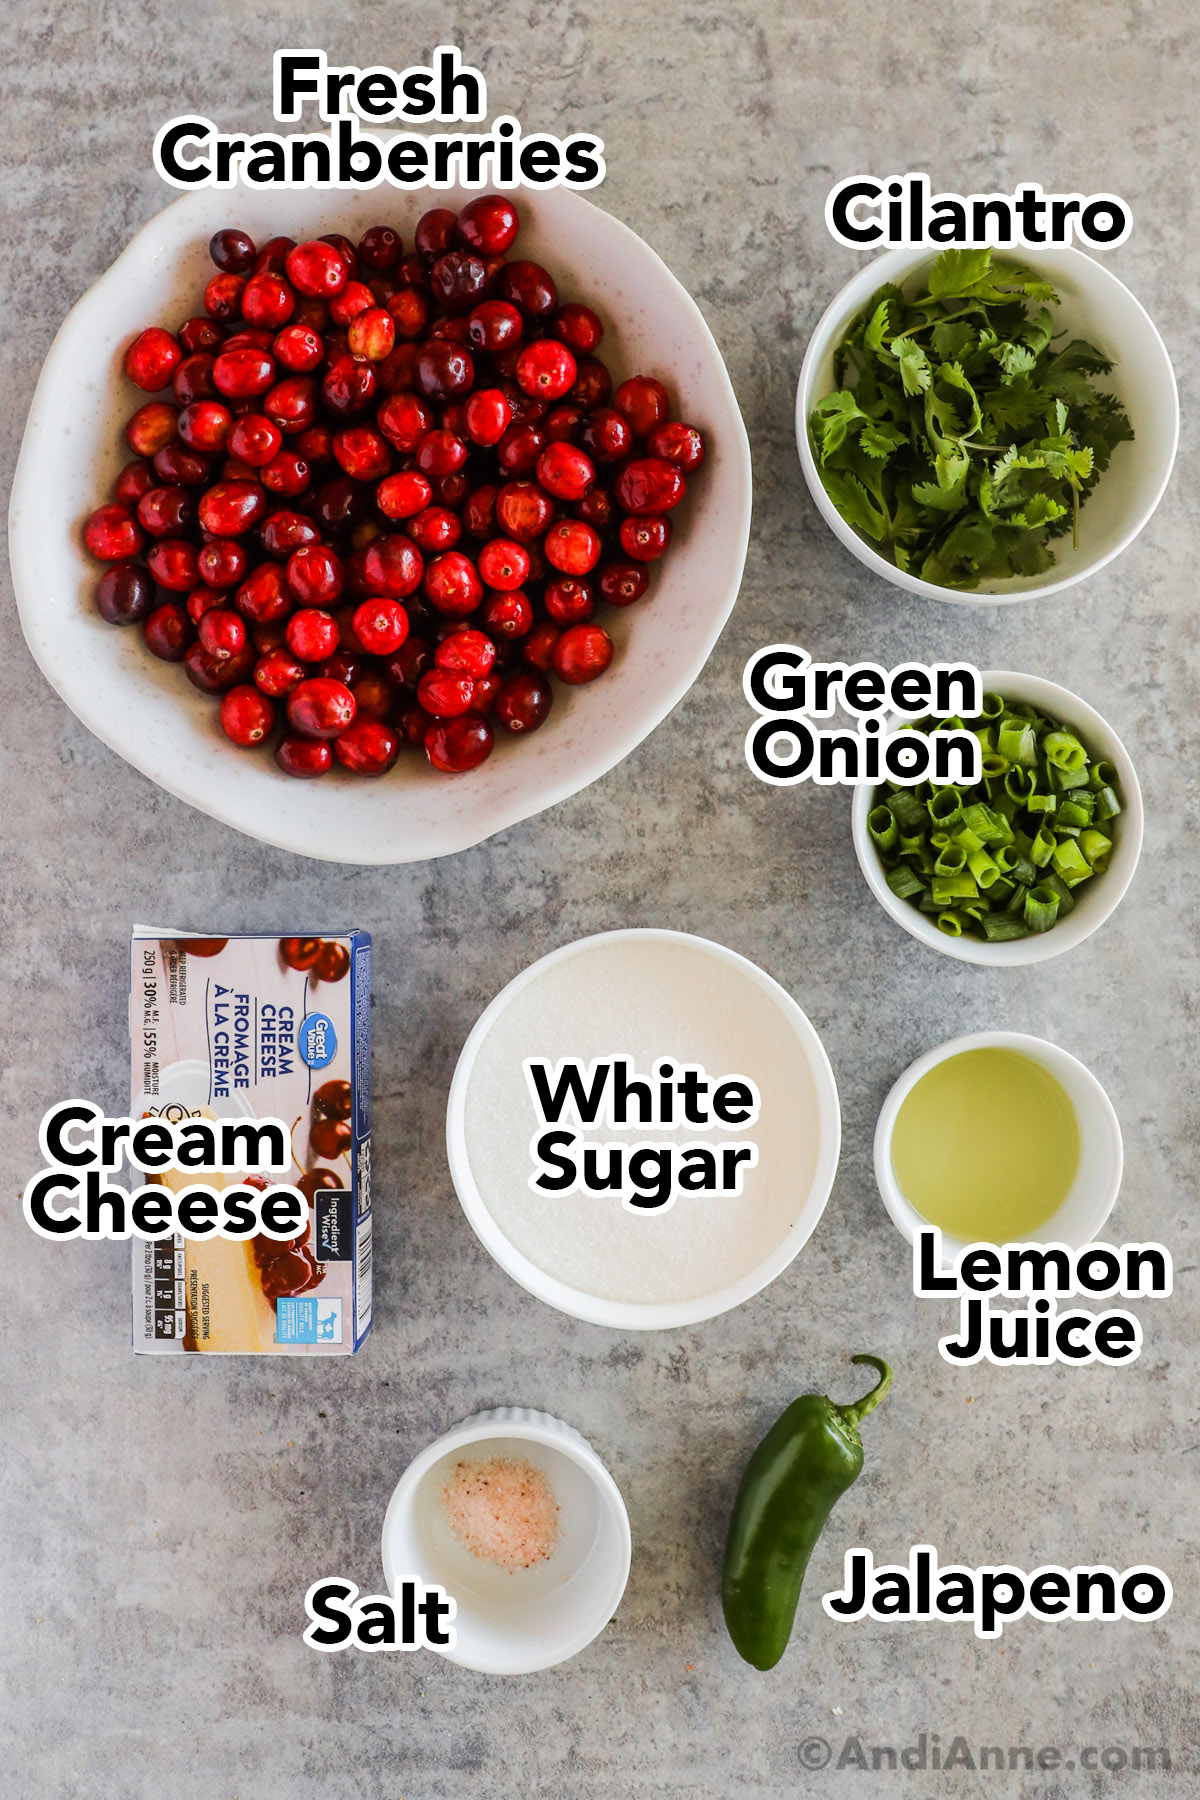 Recipe ingredients including bowls of cranberries, cilantro, green onion, cream cheese, white sugar, lemon juice, salt and a jalapeno.